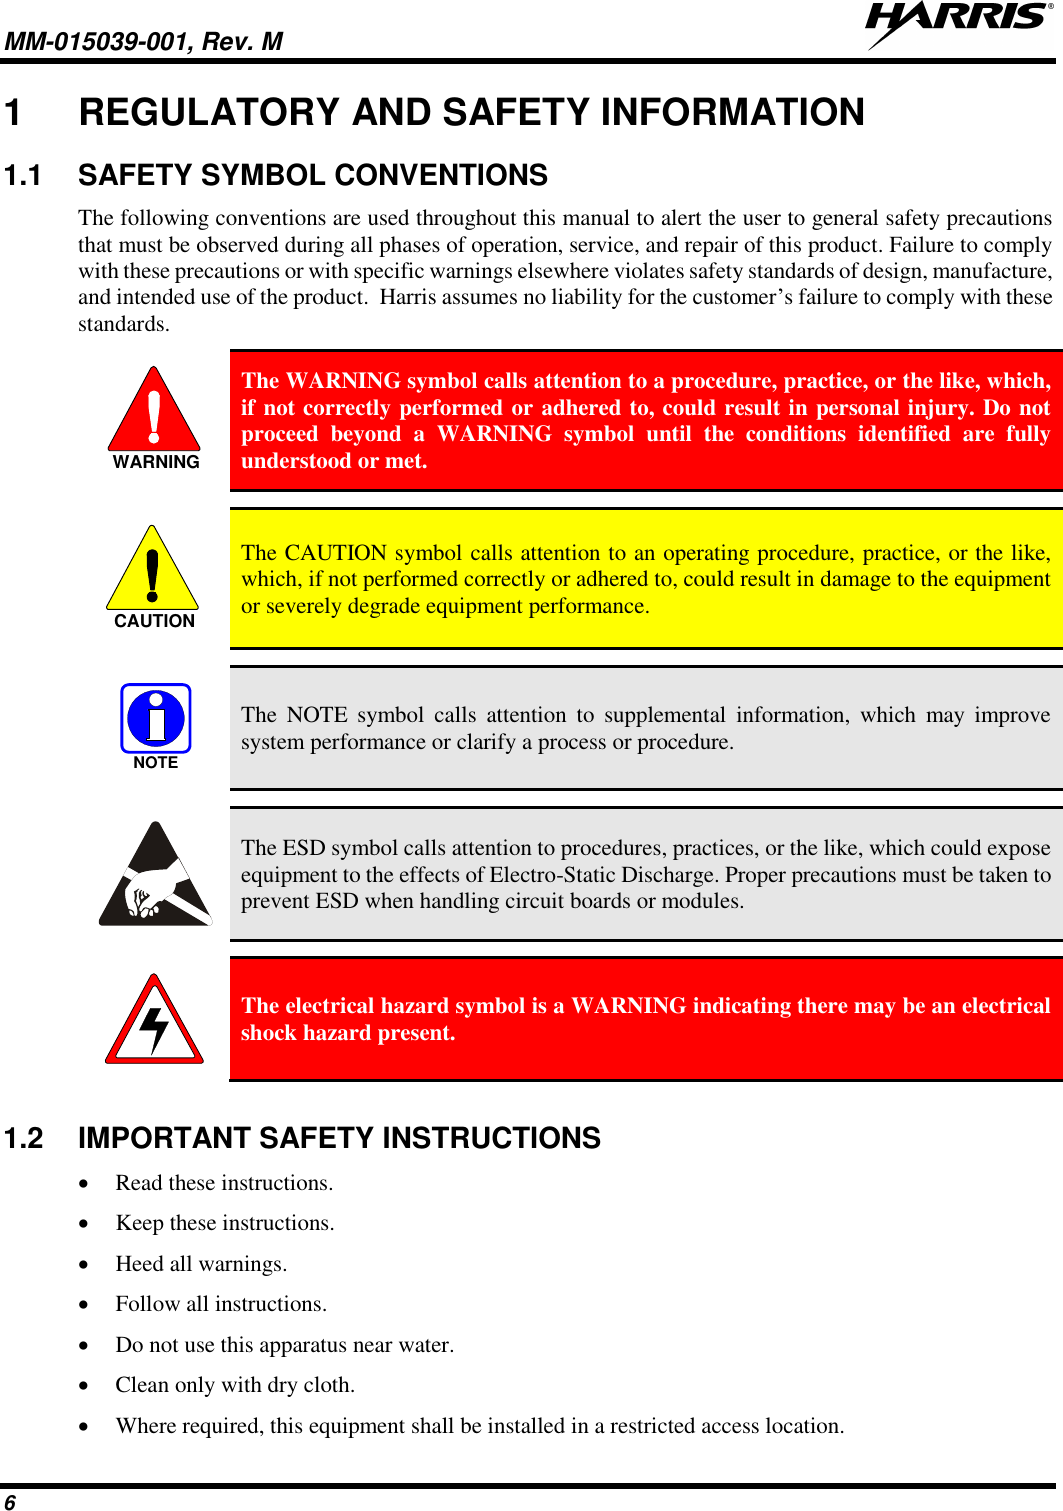 MM-015039-001, Rev. M     6 1  REGULATORY AND SAFETY INFORMATION 1.1  SAFETY SYMBOL CONVENTIONS The following conventions are used throughout this manual to alert the user to general safety precautions that must be observed during all phases of operation, service, and repair of this product. Failure to comply with these precautions or with specific warnings elsewhere violates safety standards of design, manufacture, and intended use of the product.  Harris assumes no liability for the customer’s failure to comply with these standards.  The WARNING symbol calls attention to a procedure, practice, or the like, which, if not correctly performed or adhered to, could result in personal injury. Do not proceed  beyond  a  WARNING  symbol  until  the  conditions  identified  are  fully understood or met.    The CAUTION symbol calls attention to an operating procedure, practice, or the like, which, if not performed correctly or adhered to, could result in damage to the equipment or severely degrade equipment performance.    The  NOTE  symbol  calls  attention  to  supplemental  information,  which  may  improve system performance or clarify a process or procedure.    The ESD symbol calls attention to procedures, practices, or the like, which could expose equipment to the effects of Electro-Static Discharge. Proper precautions must be taken to prevent ESD when handling circuit boards or modules.    The electrical hazard symbol is a WARNING indicating there may be an electrical shock hazard present.  1.2  IMPORTANT SAFETY INSTRUCTIONS • Read these instructions. • Keep these instructions. • Heed all warnings. • Follow all instructions. • Do not use this apparatus near water. • Clean only with dry cloth. • Where required, this equipment shall be installed in a restricted access location. WARNINGCAUTIONNOTE